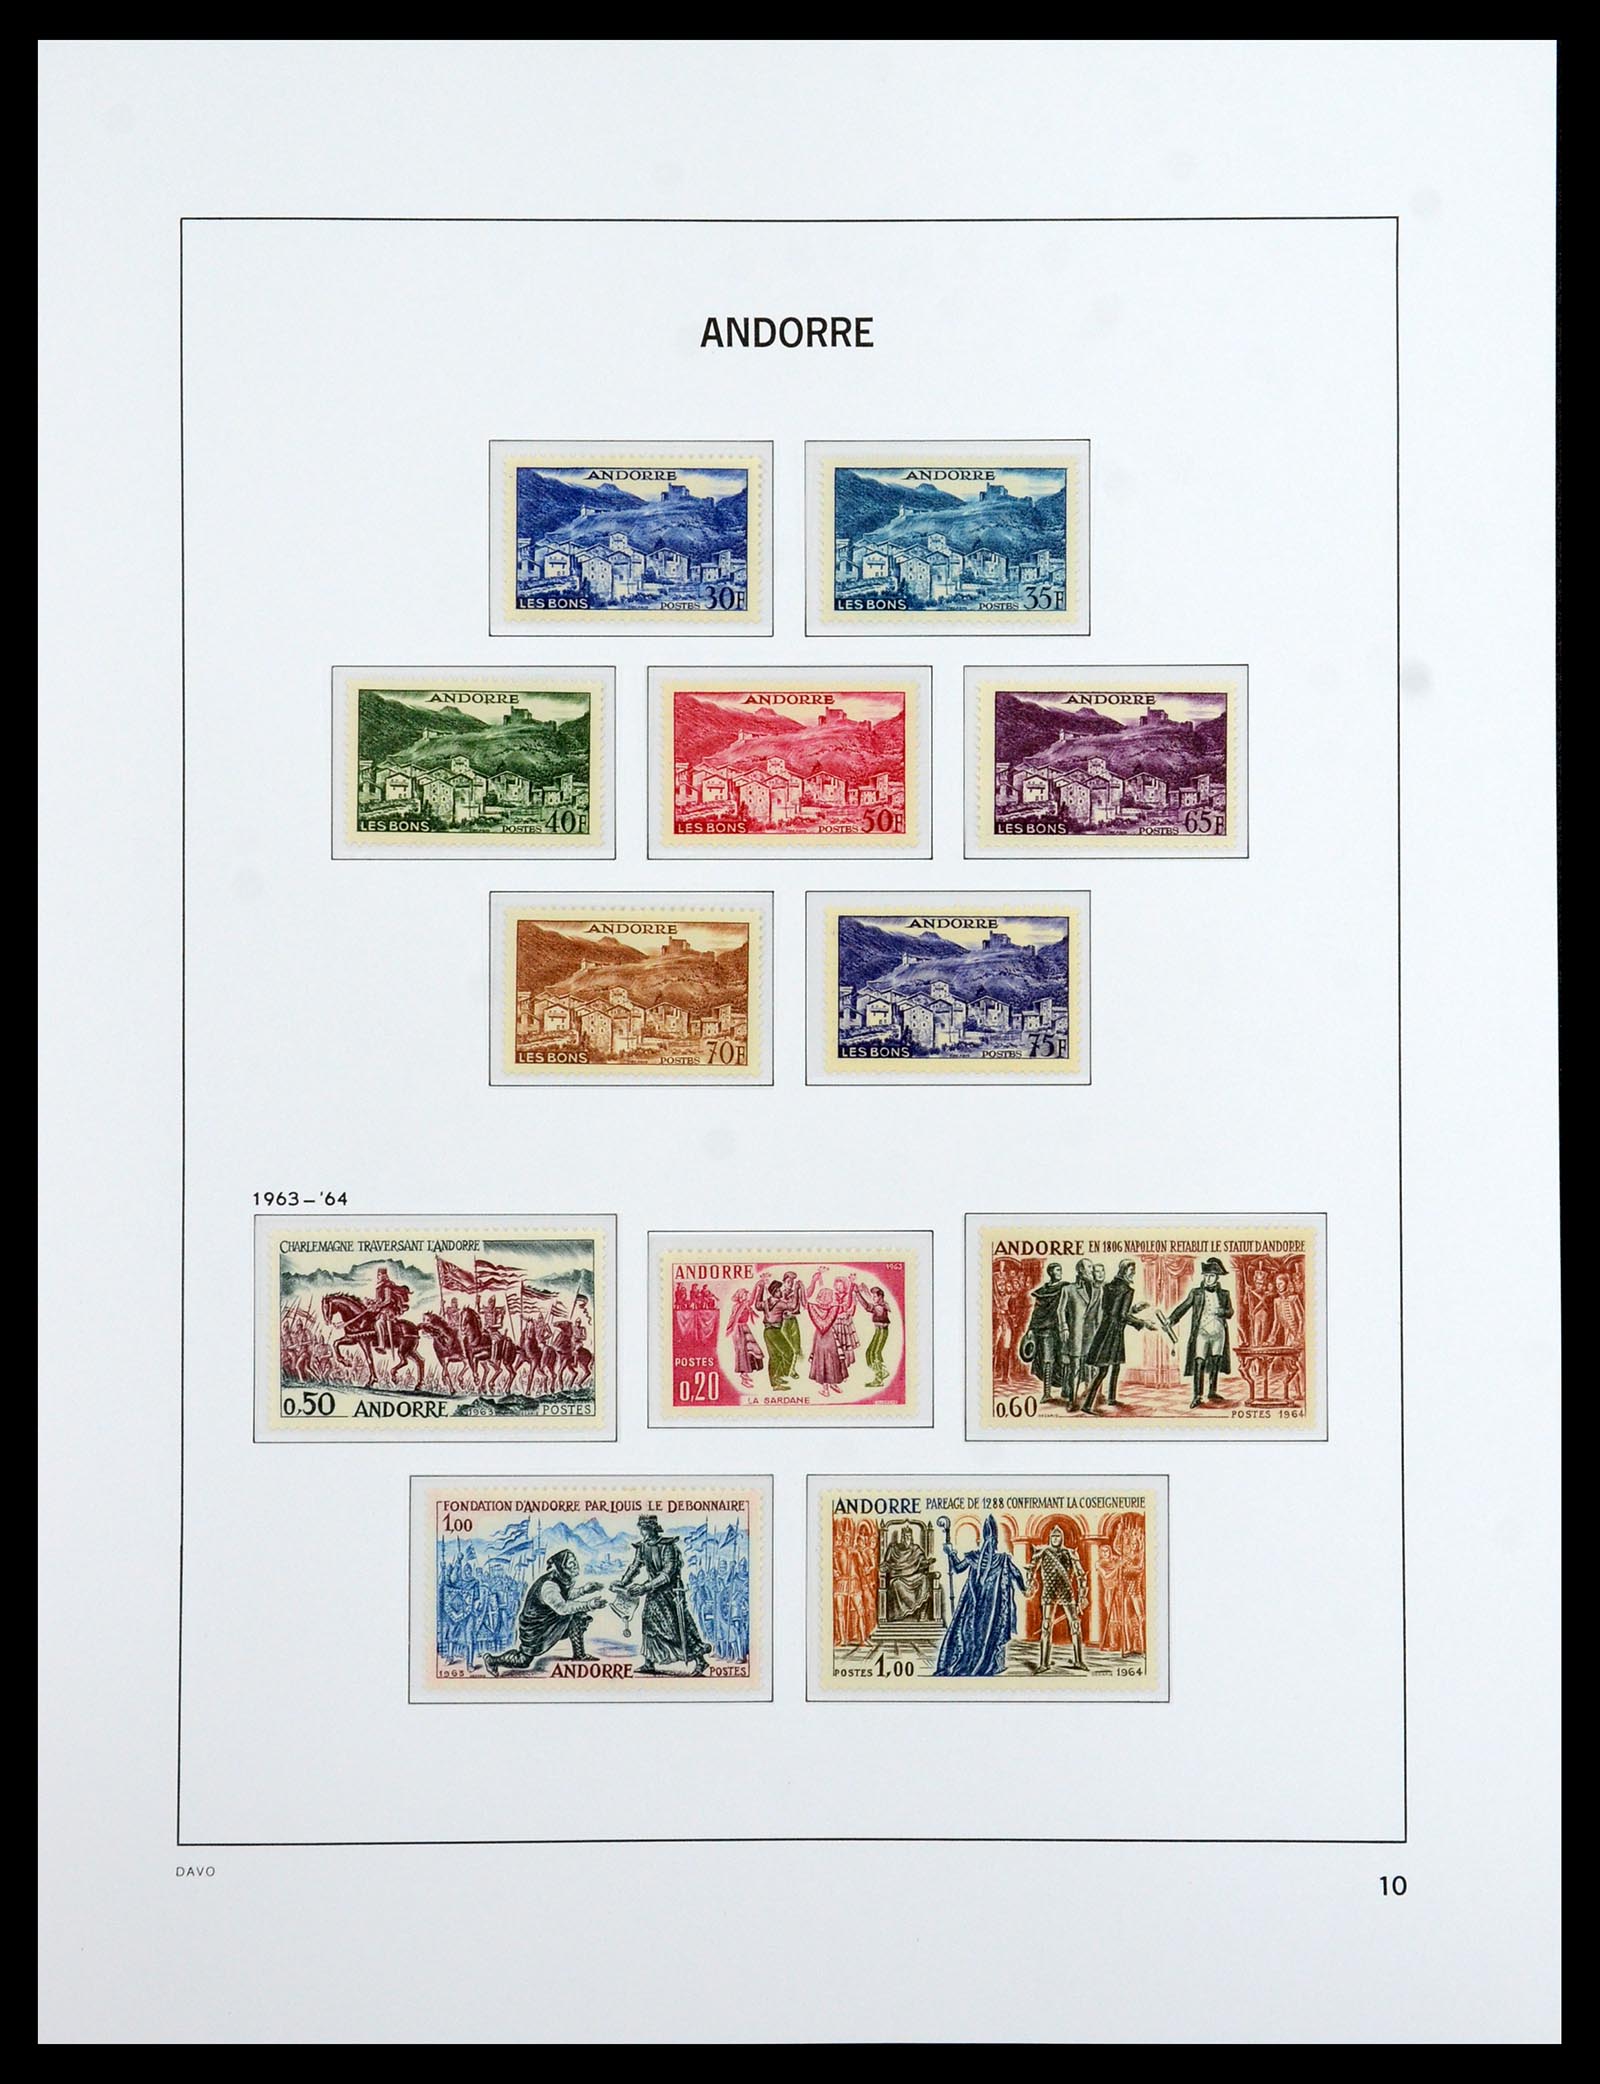 36514 010 - Stamp collection 36514 French Andorra 1931-2002.